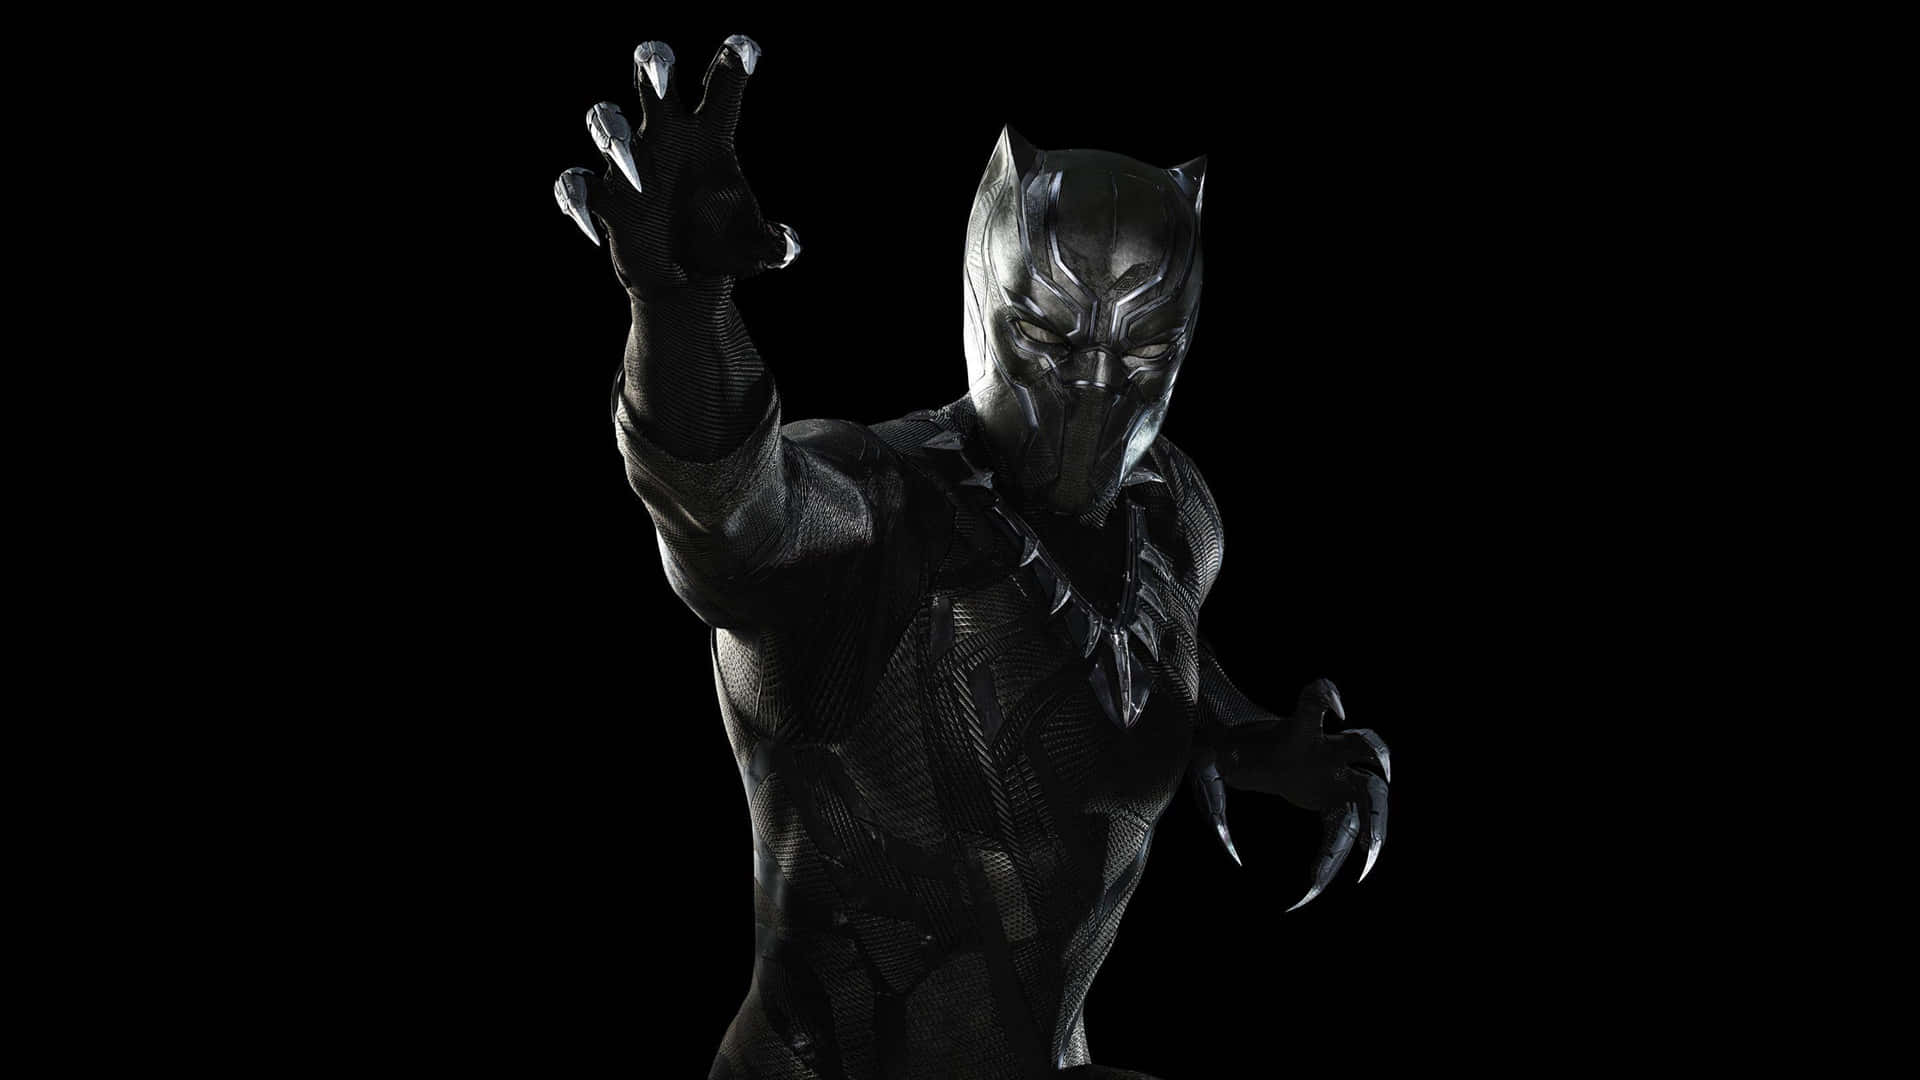 Share the Wild Beauty of Black Panther Country Wallpaper